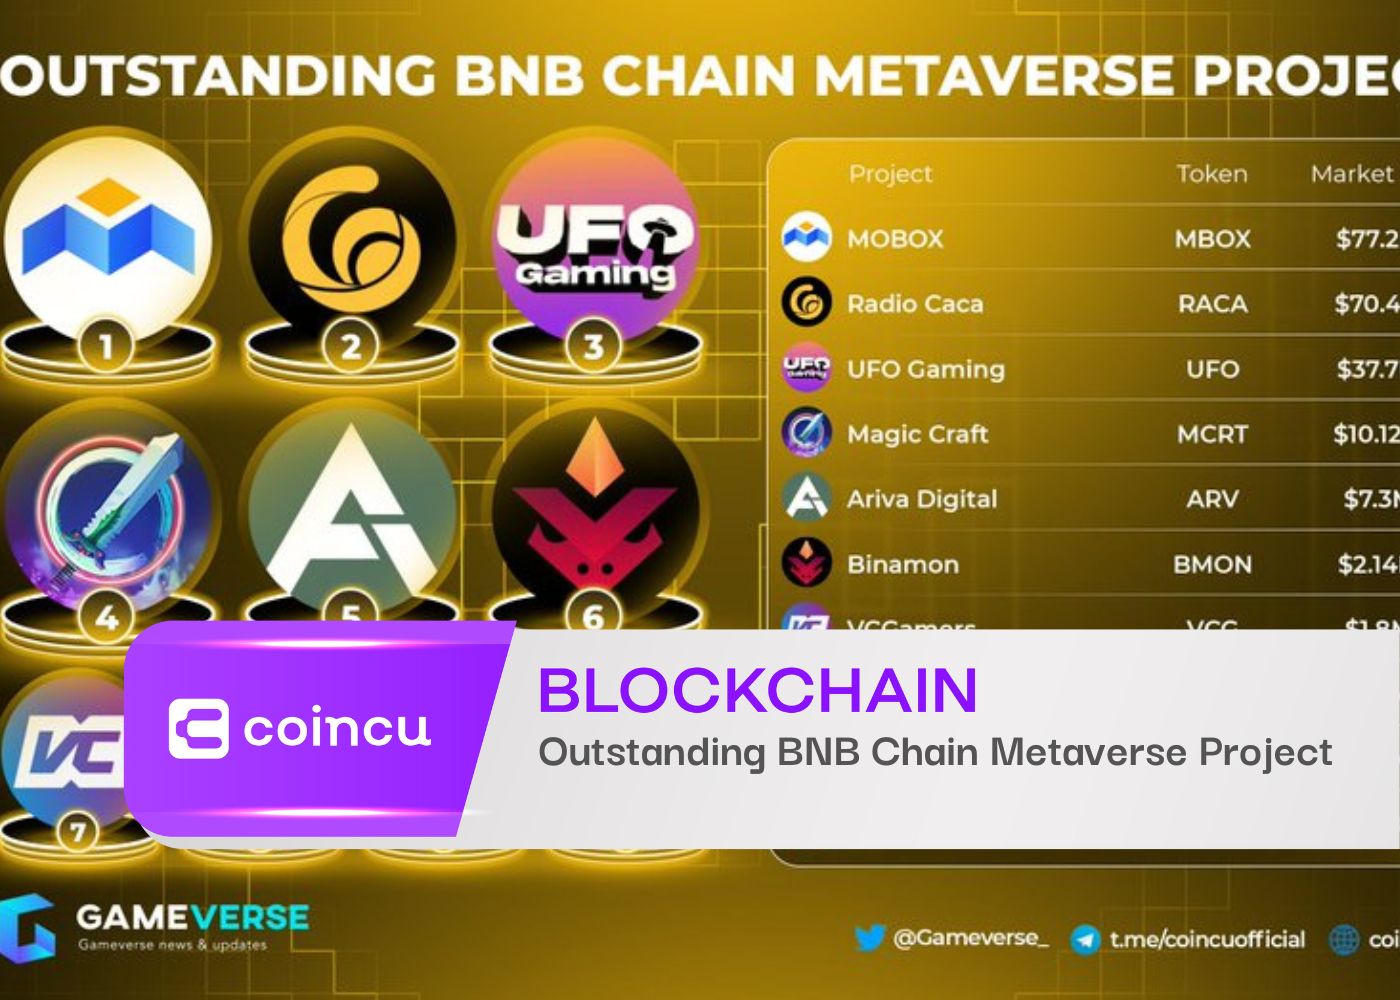 Outstanding BNB Chain Metaverse Project